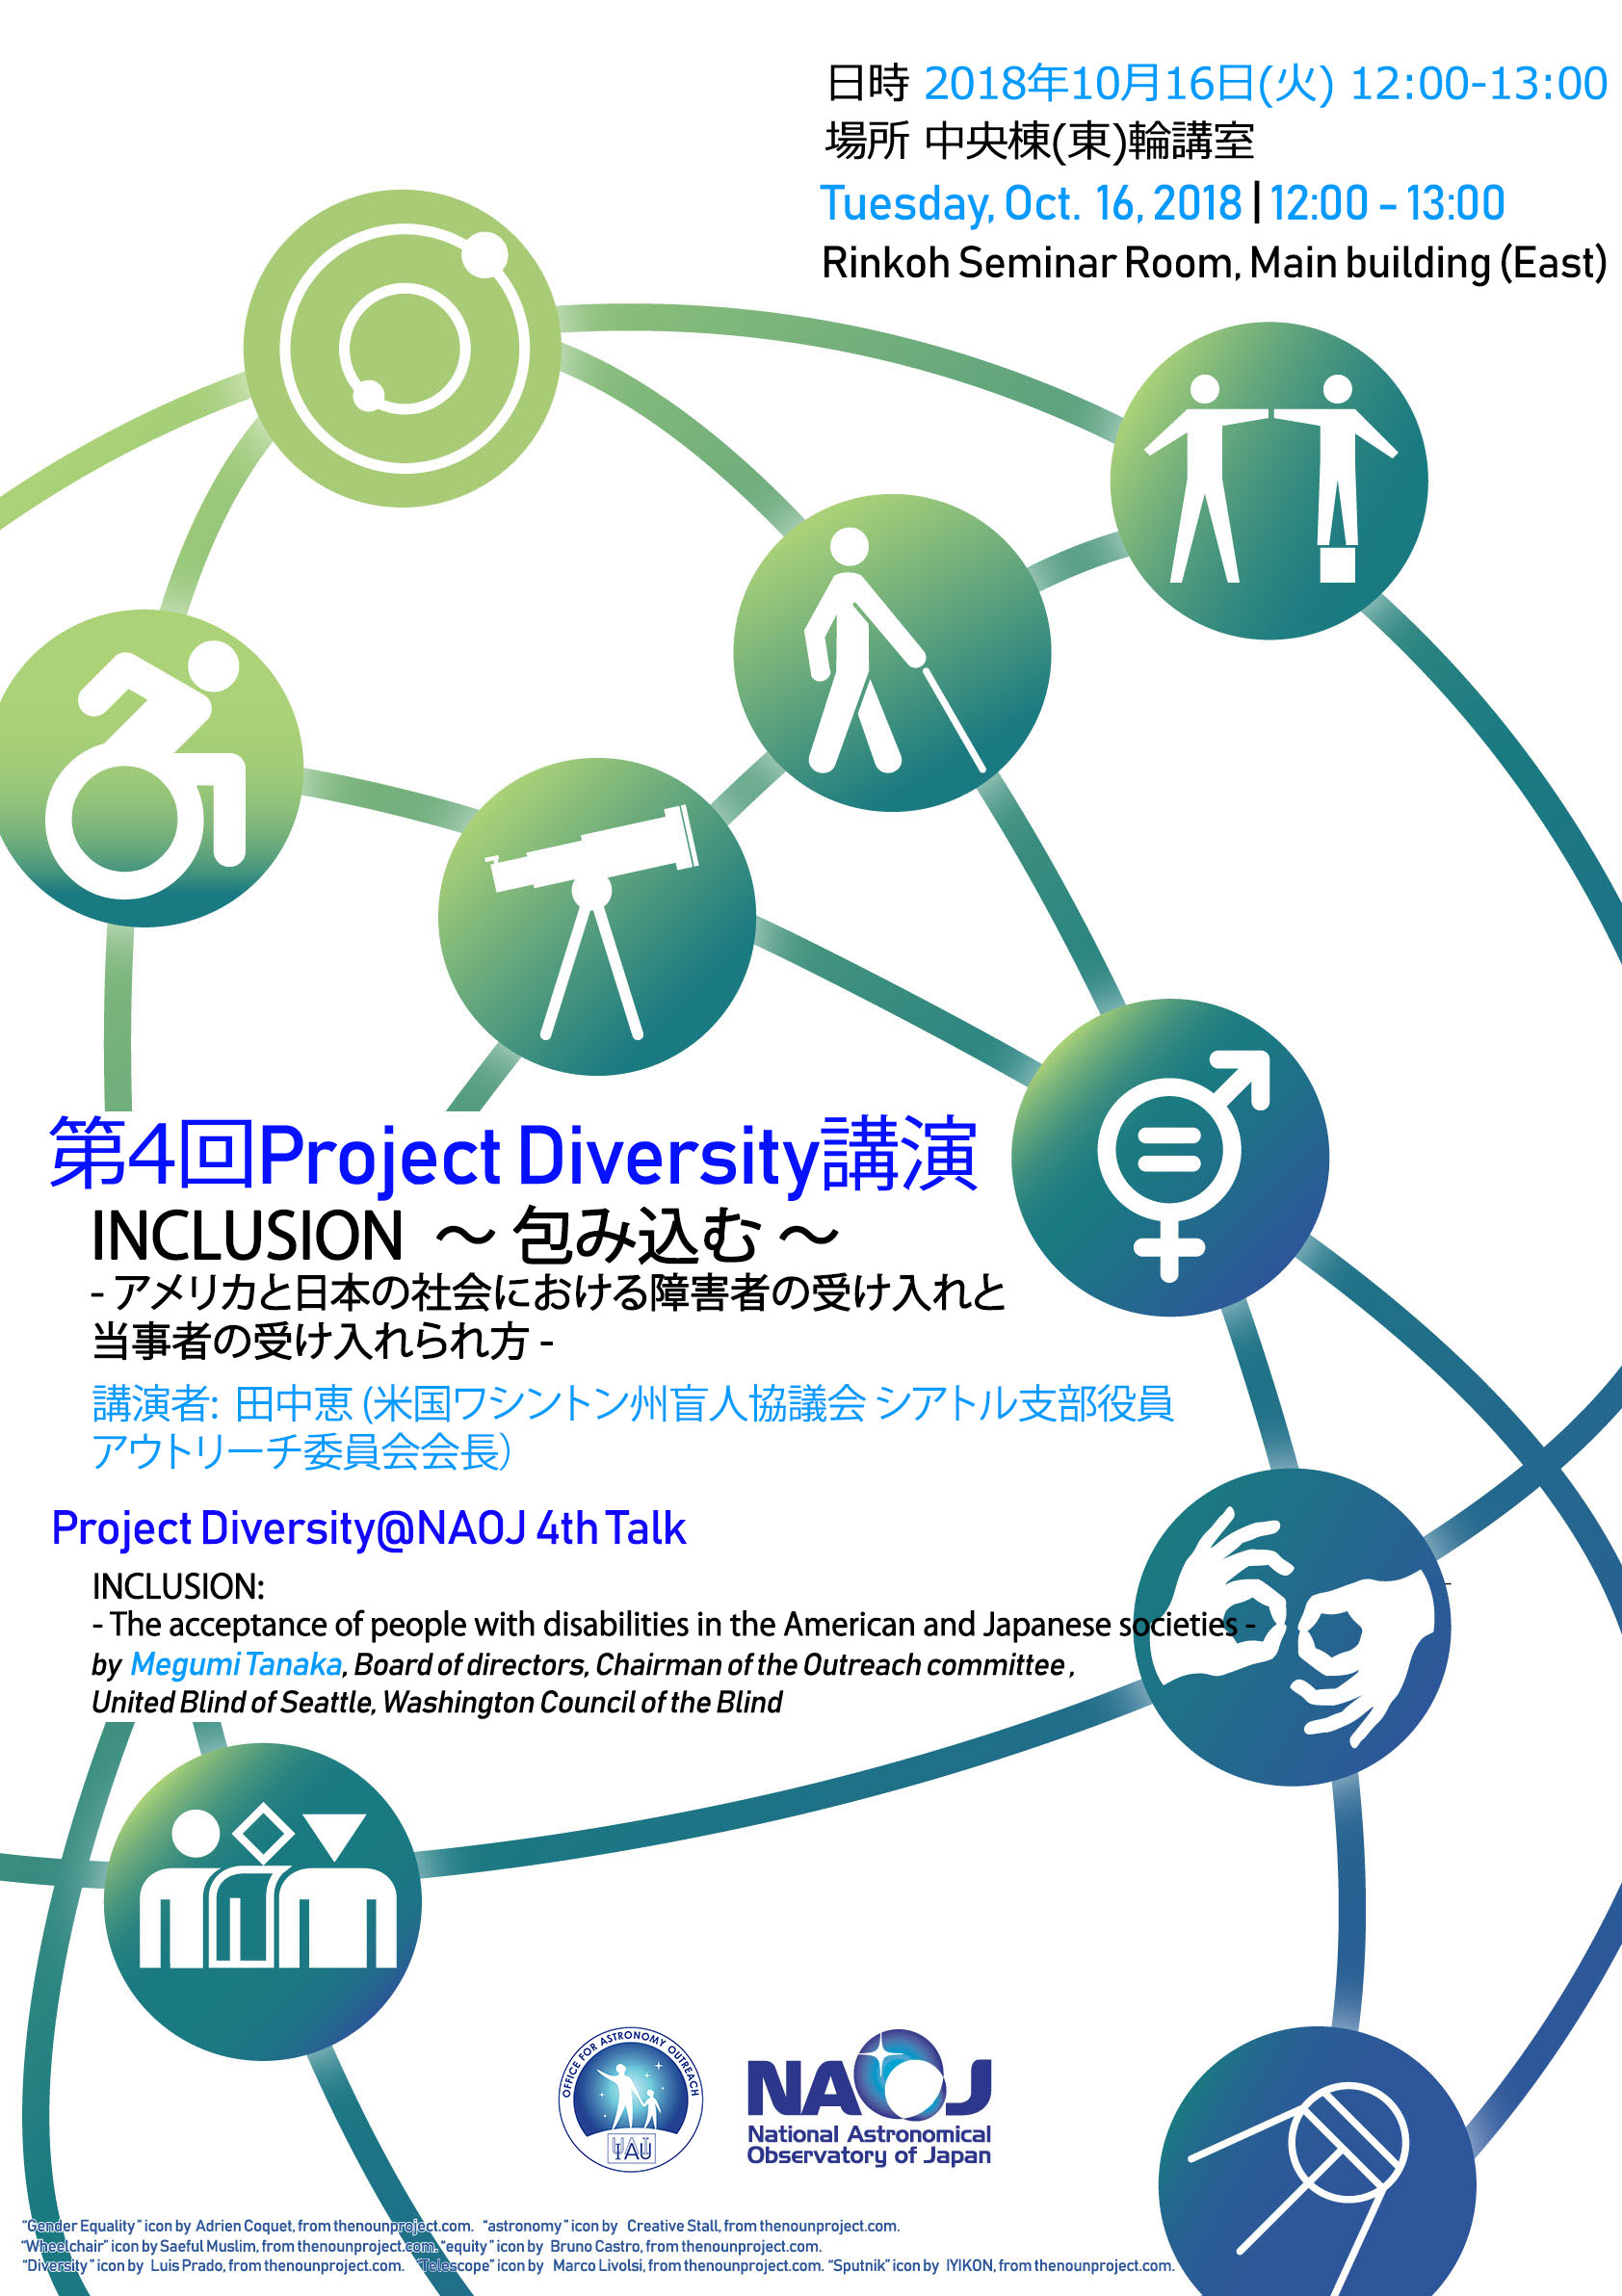 Project Diversity@NAOJ – Astronomy for Equity, Diversity and Inclusion